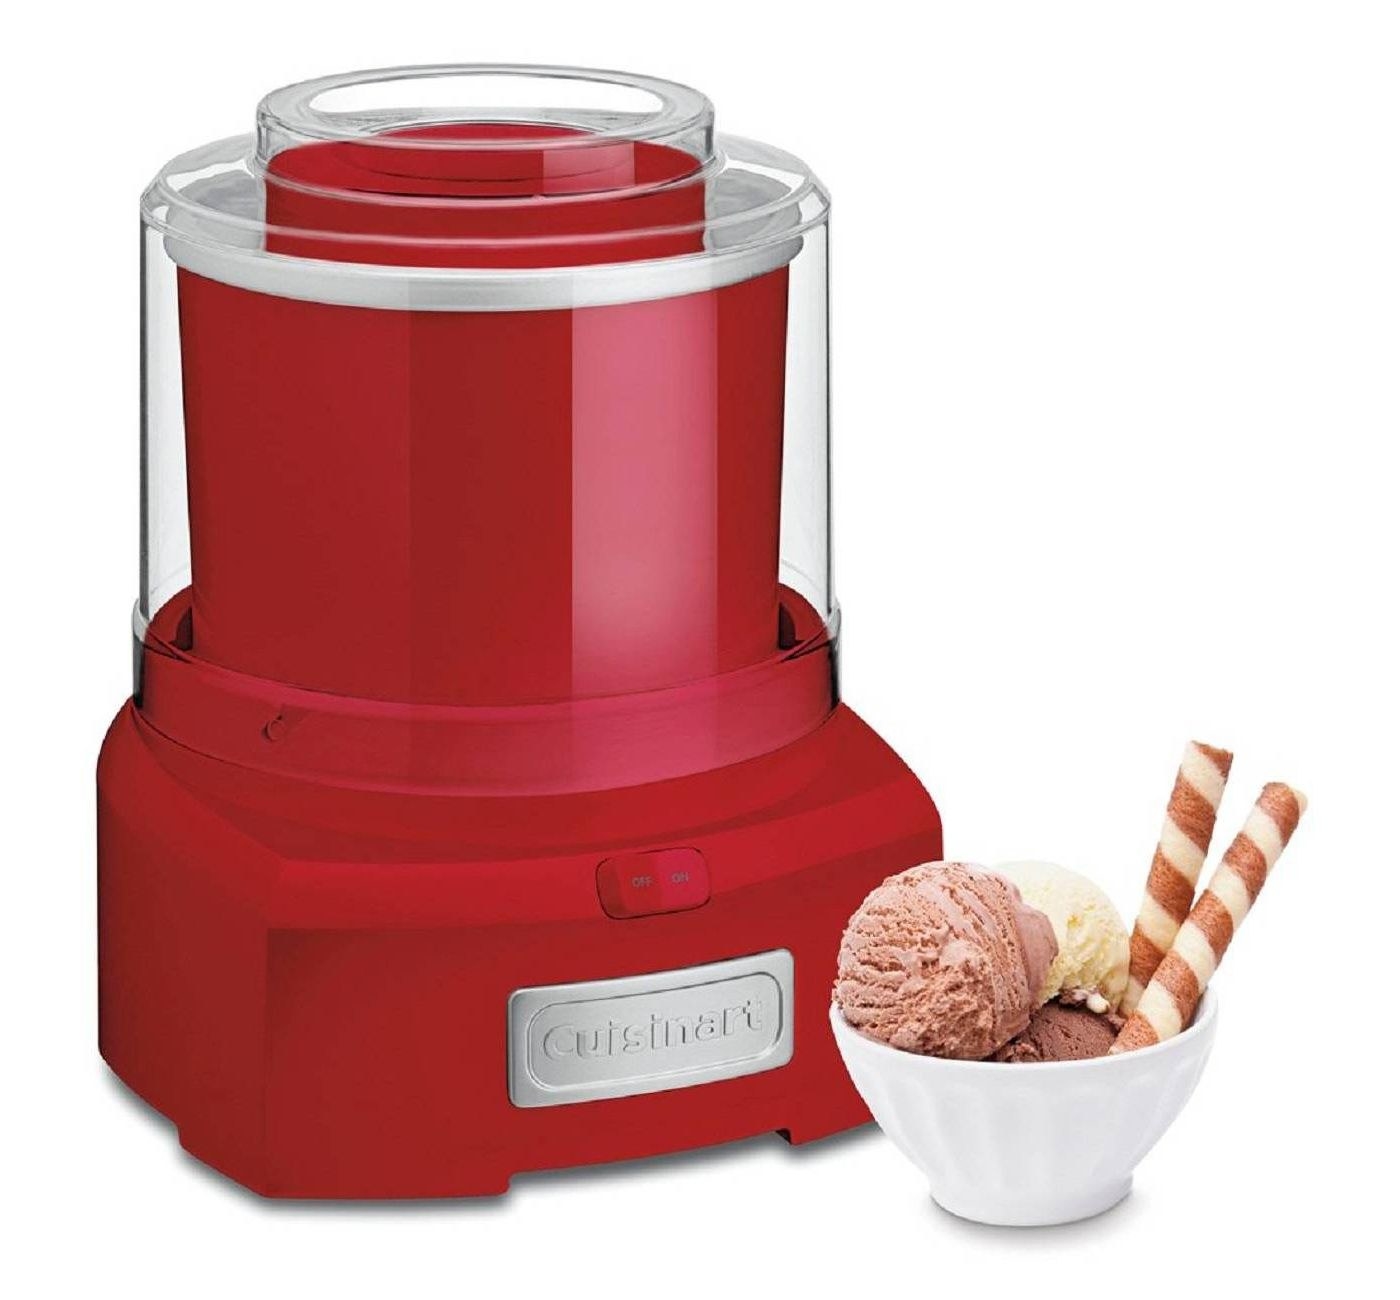 The ice cream maker, which is red, with a cylindrical top and rectangular base